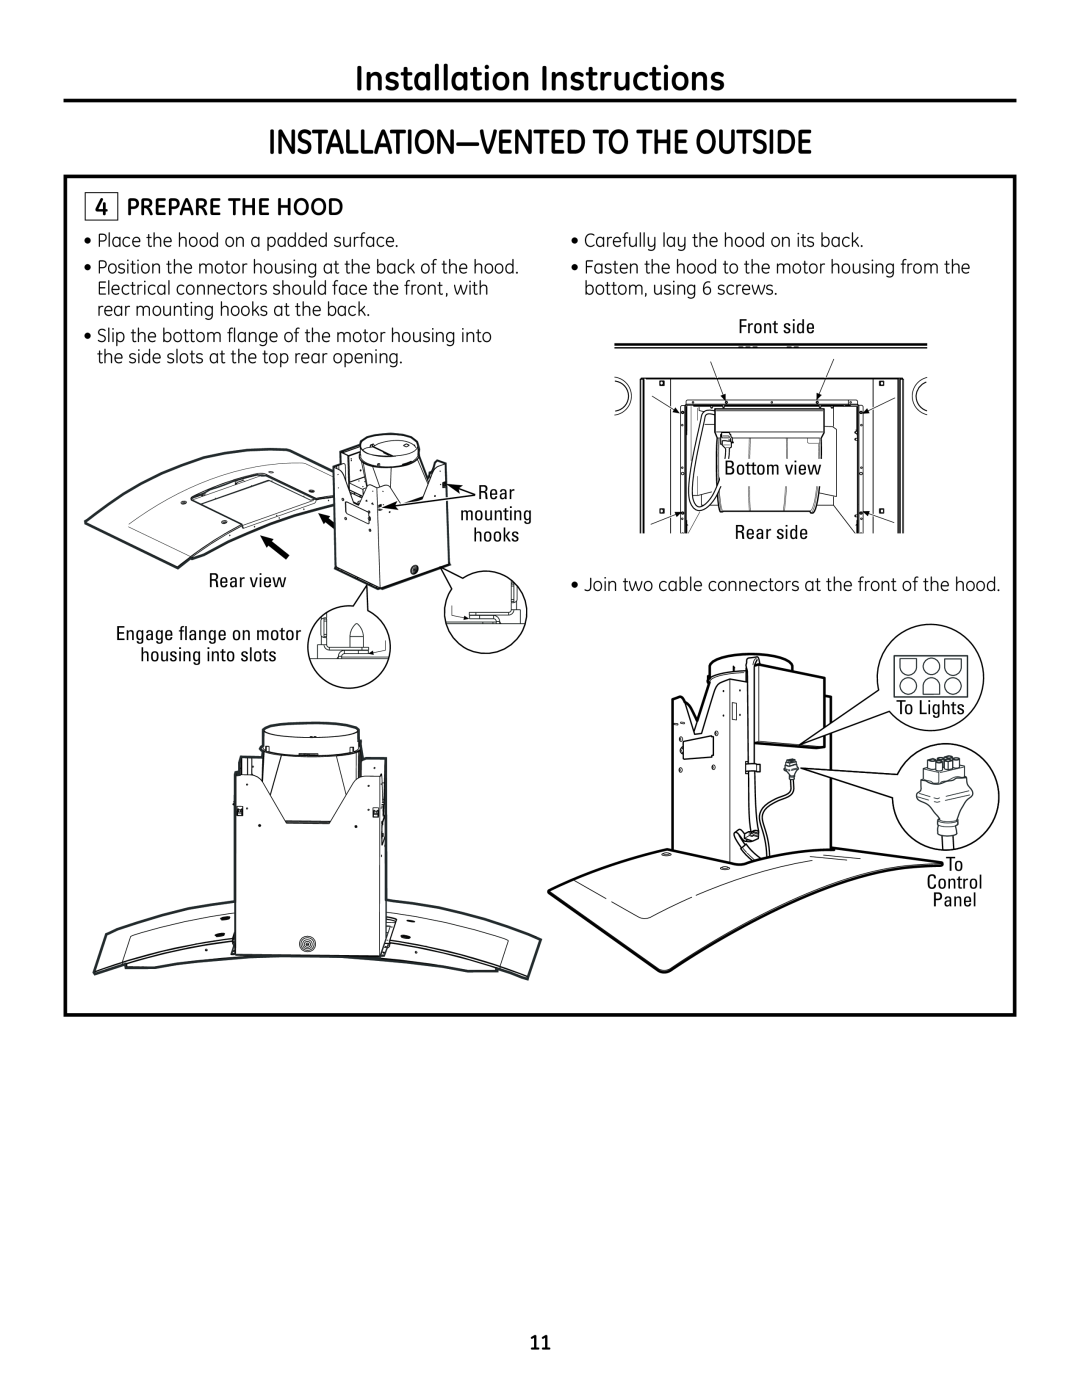 GE ZV900 installation instructions Prepare The Hood, Installation Instructions INSTALLATION-VENTED TO THE OUTSIDE 